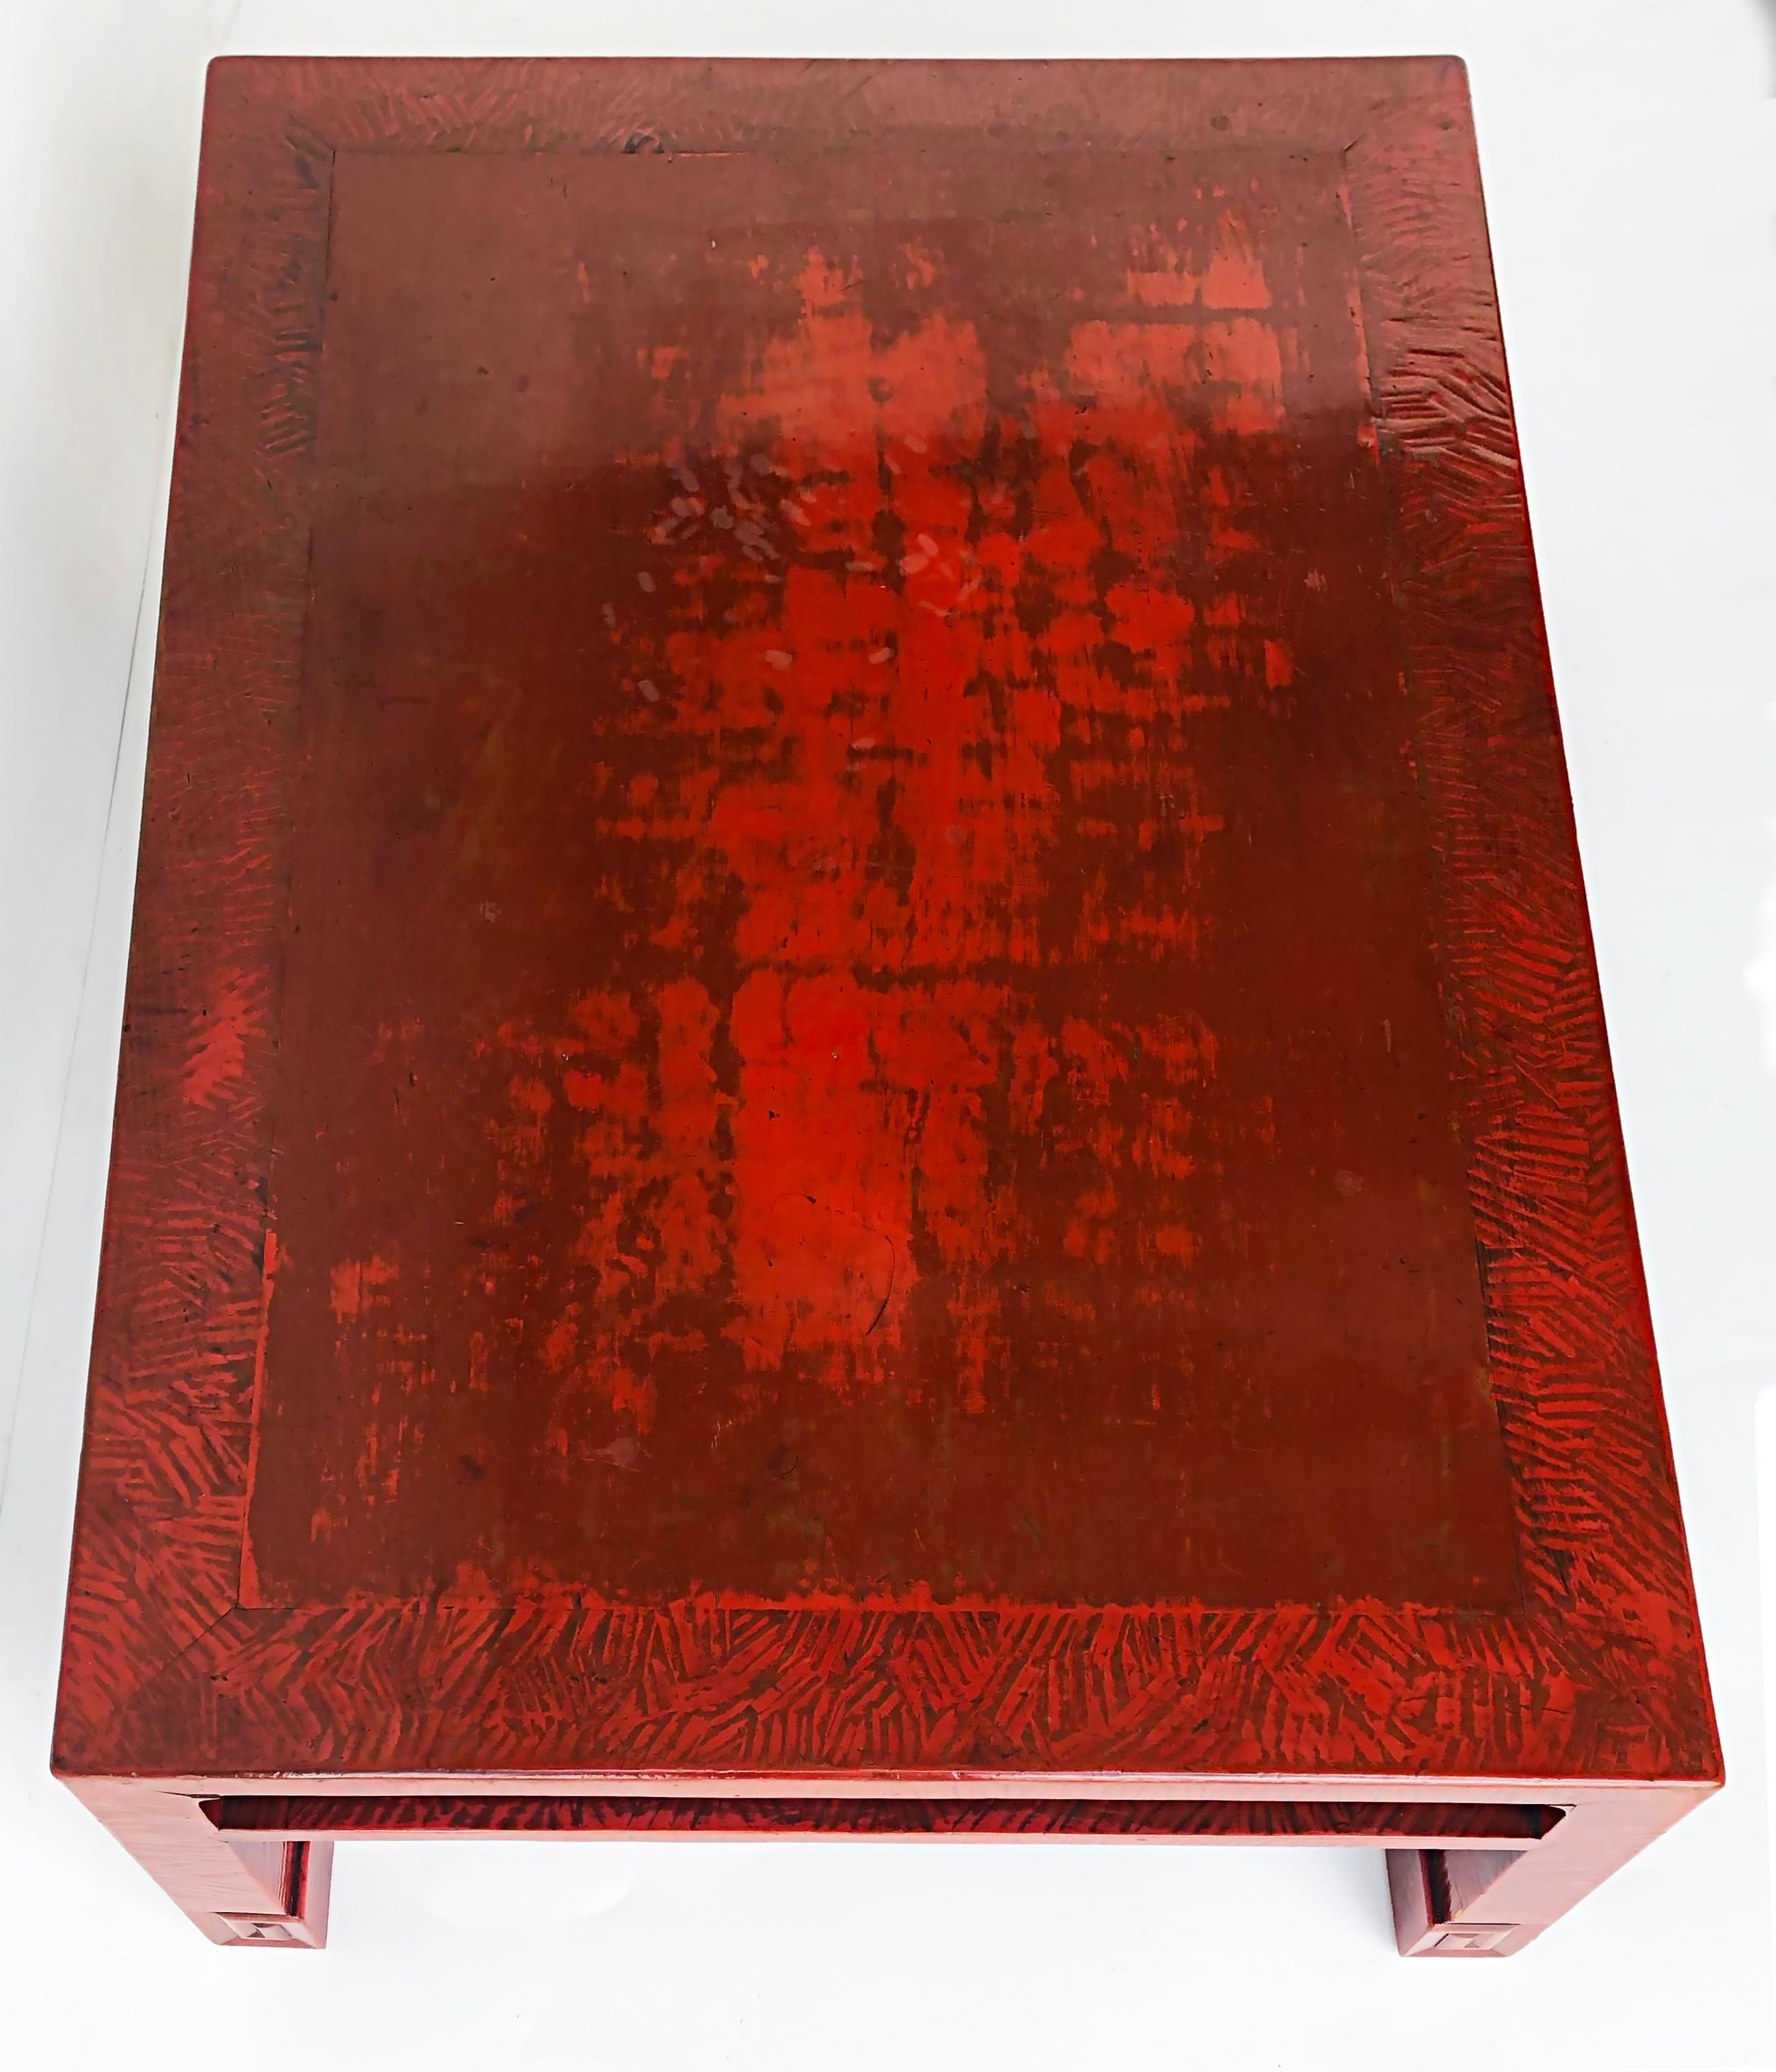 Vintage Chinese red lacquered rectangular coffee table

Offered for sale is a striking vintage Chinese coffee table that is created in a 2-tone red lacquer finish with some light built-up textures of the finish materials. The table has legs with